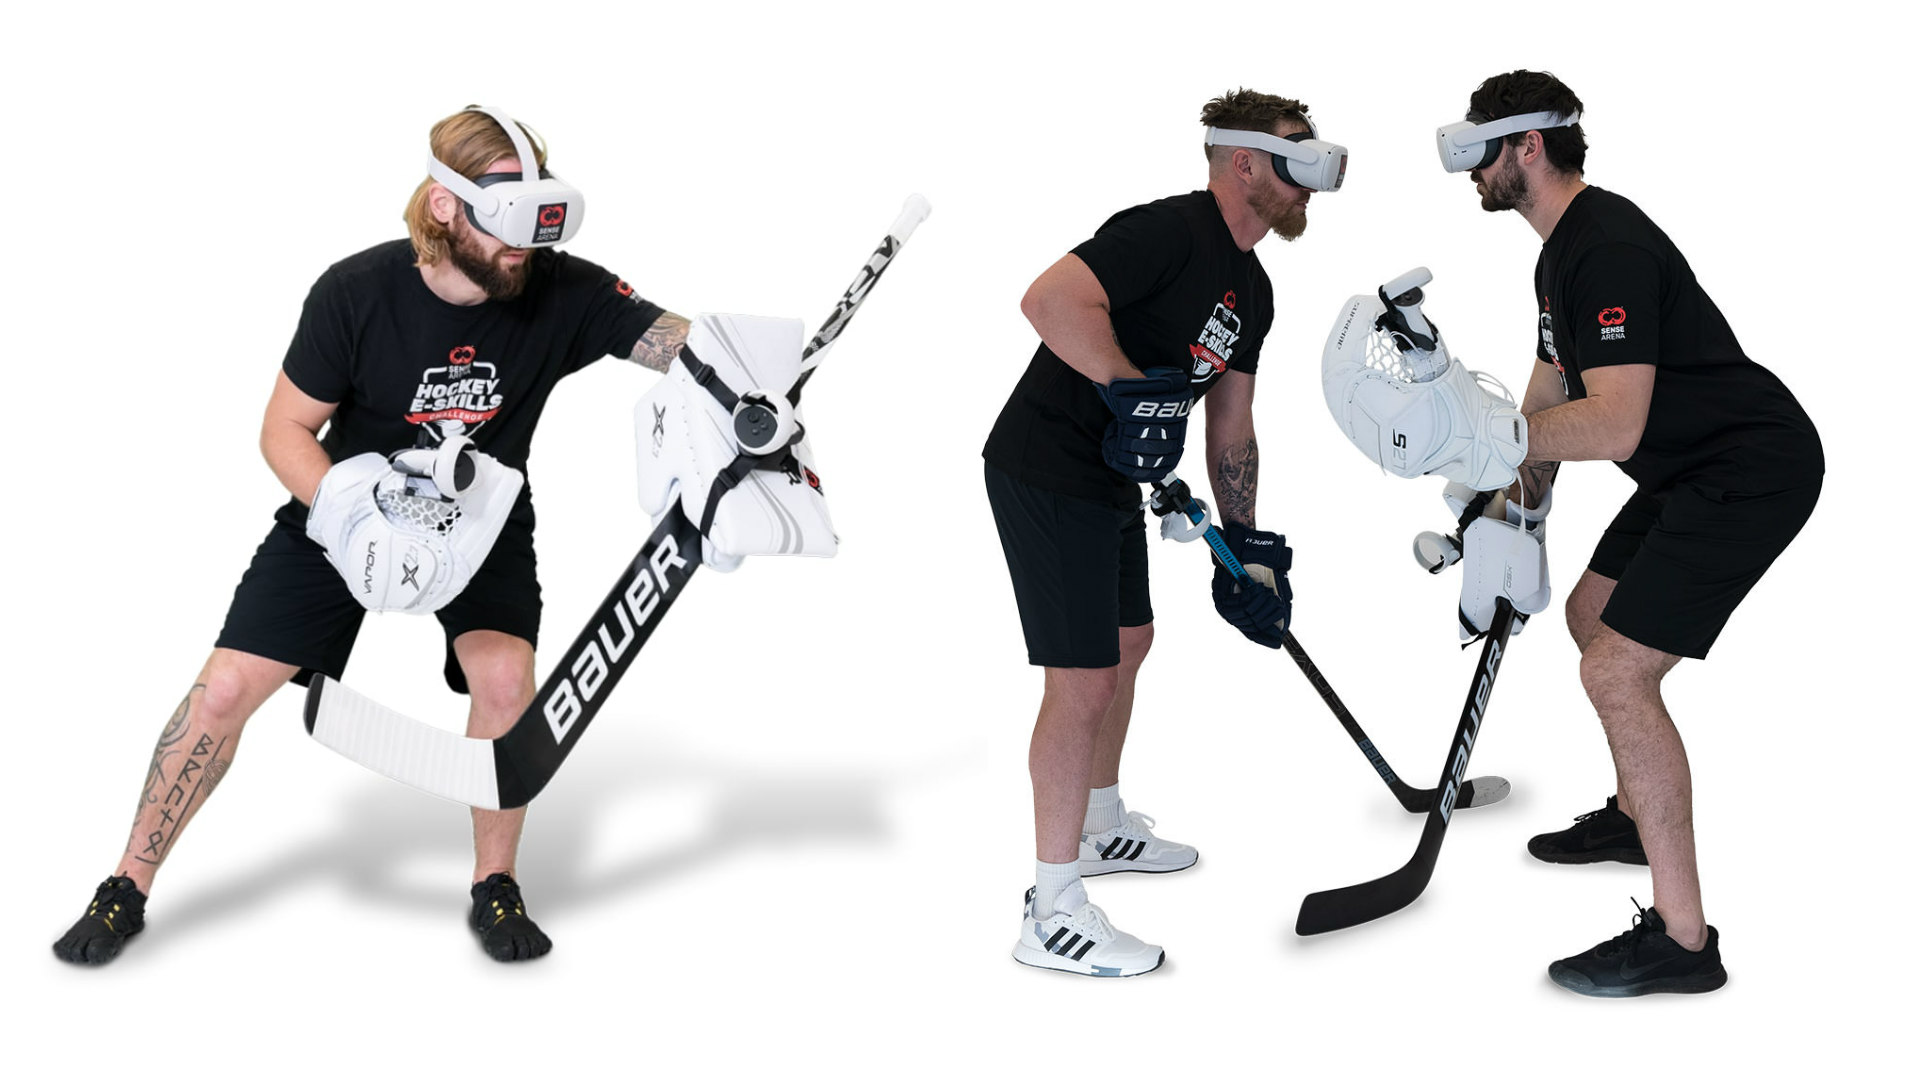 Sense Arena Secures $3M to Expand Ice Hockey VR Training Tools, Add New Sports